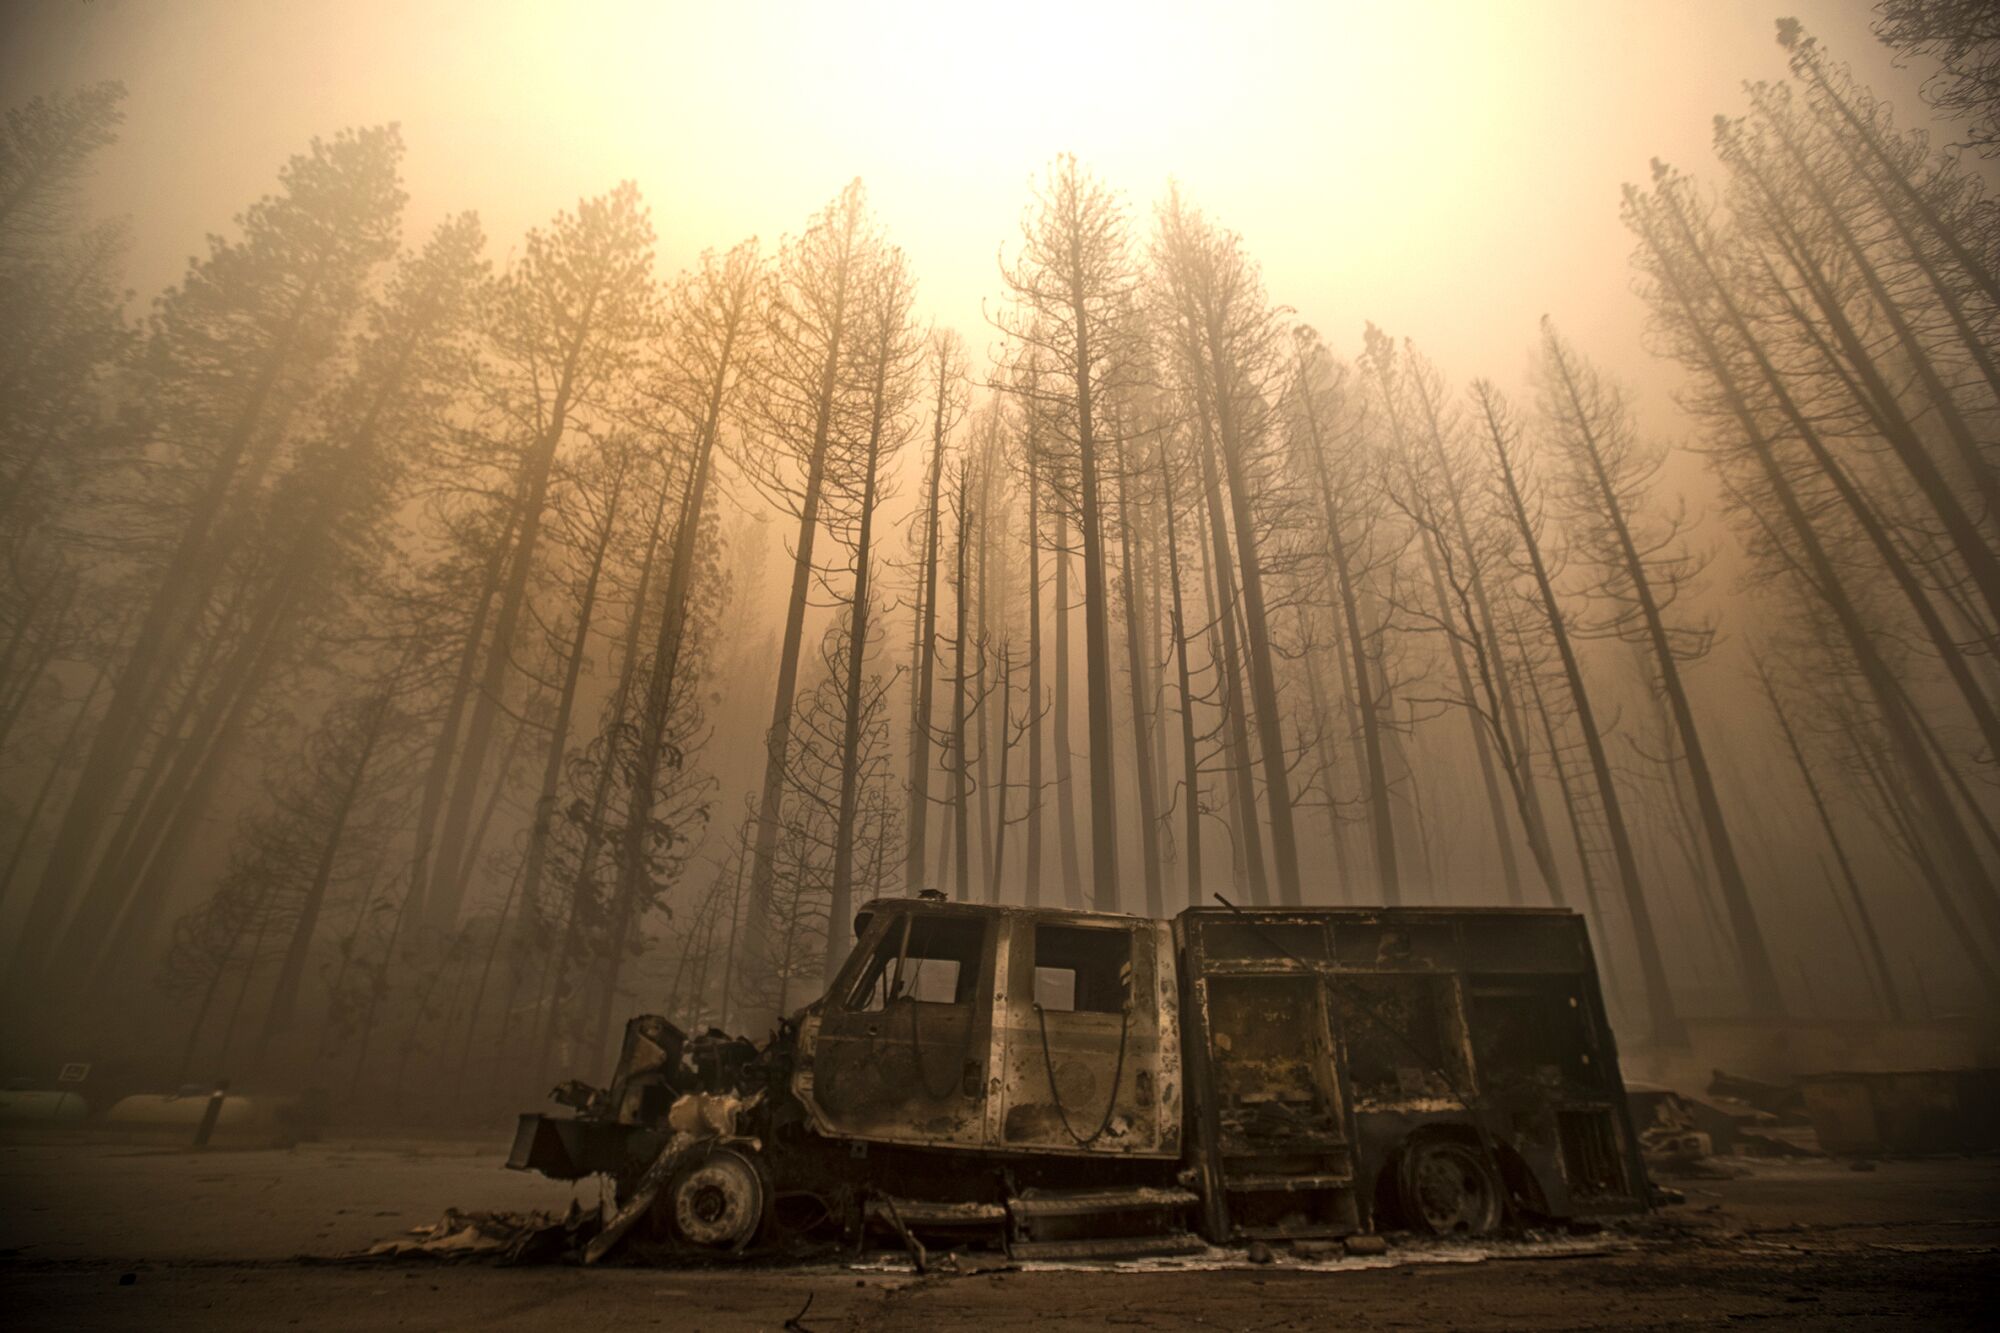 A burned fire truck is framed by trees destroyed in the Dixie fire in Greenville.